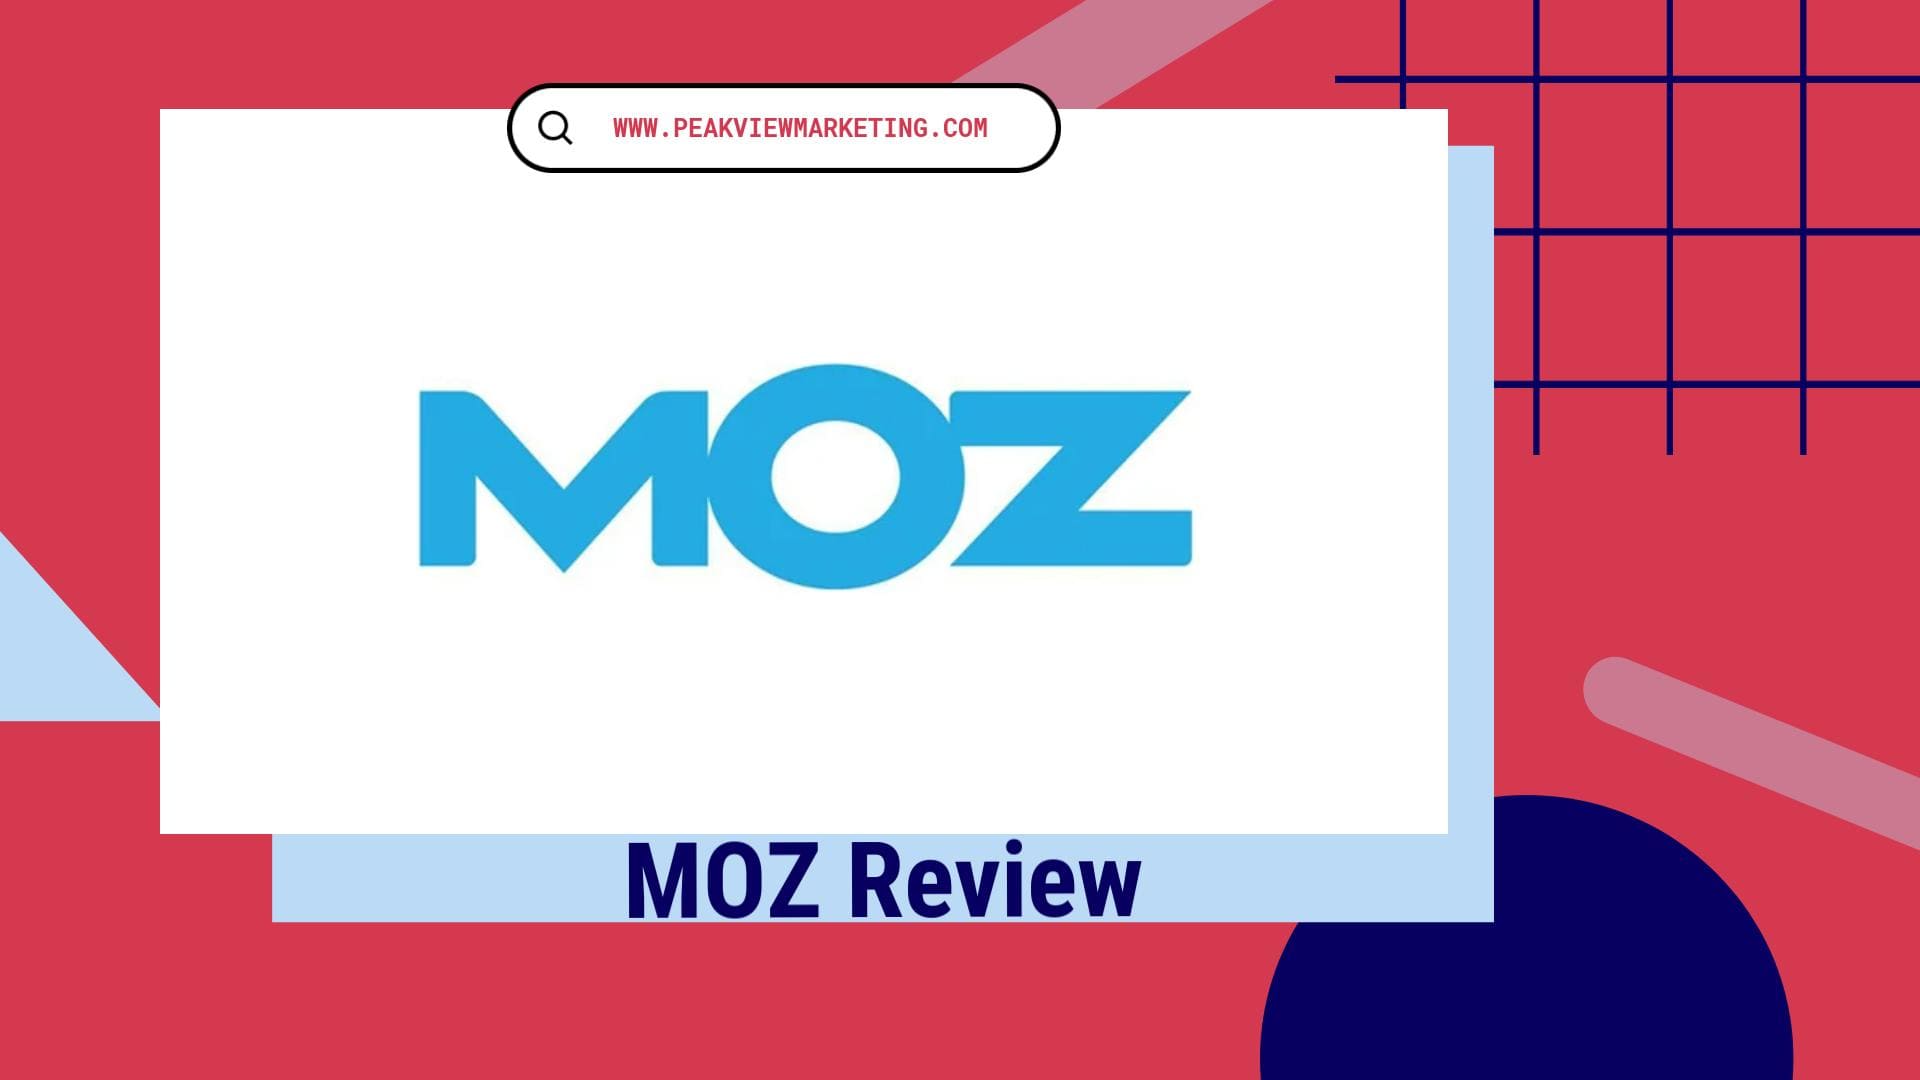 MOZ Review Image